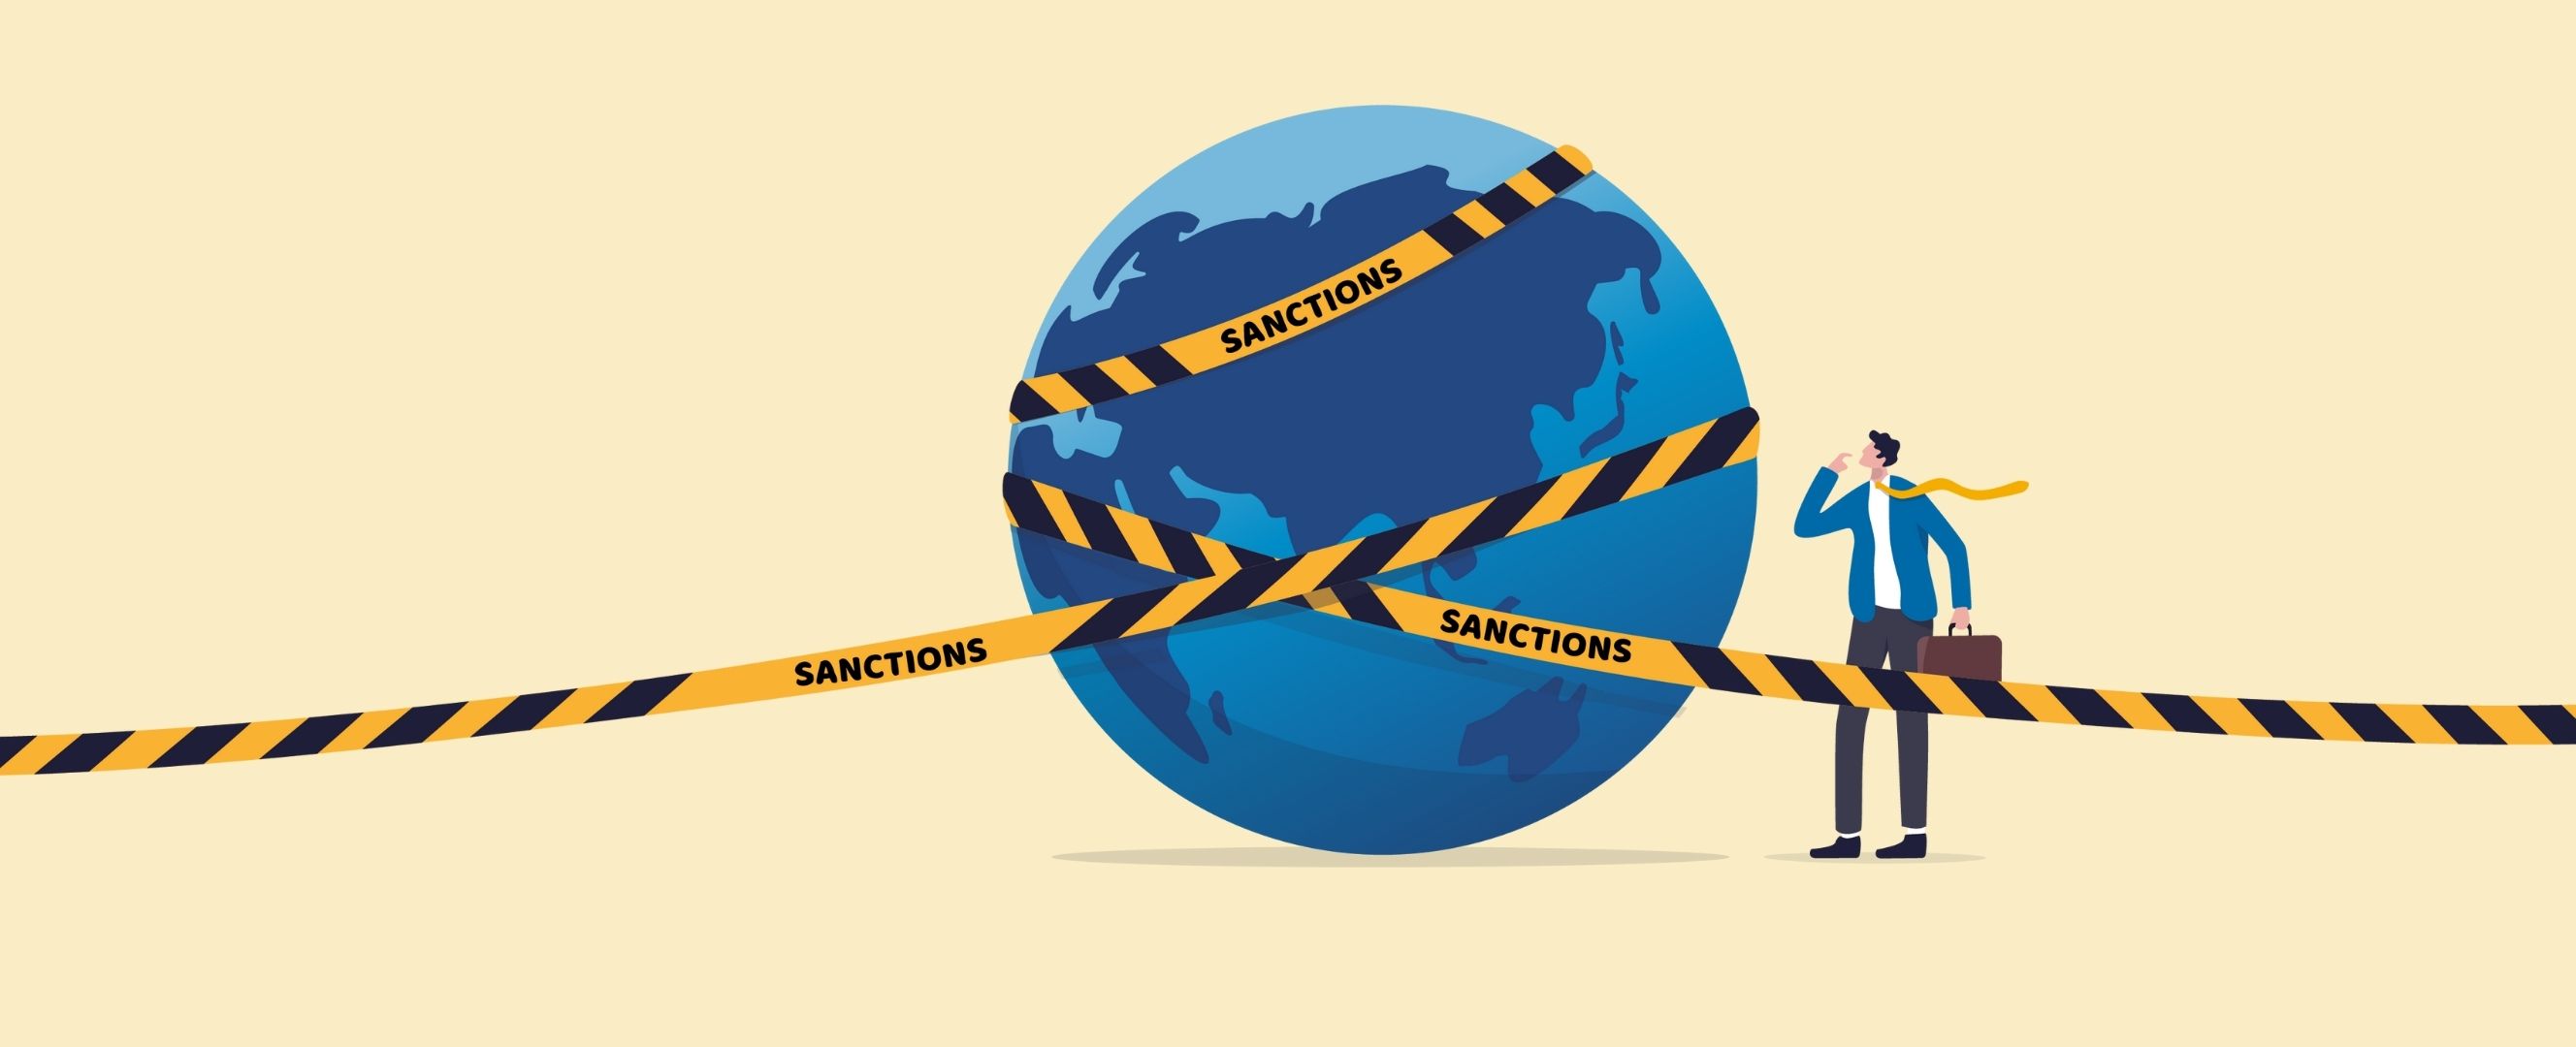 The Sanctions Weapon Economic sanctions deliver bigger global shocks  than ever before and are easier to evade Nicholas Mulder 